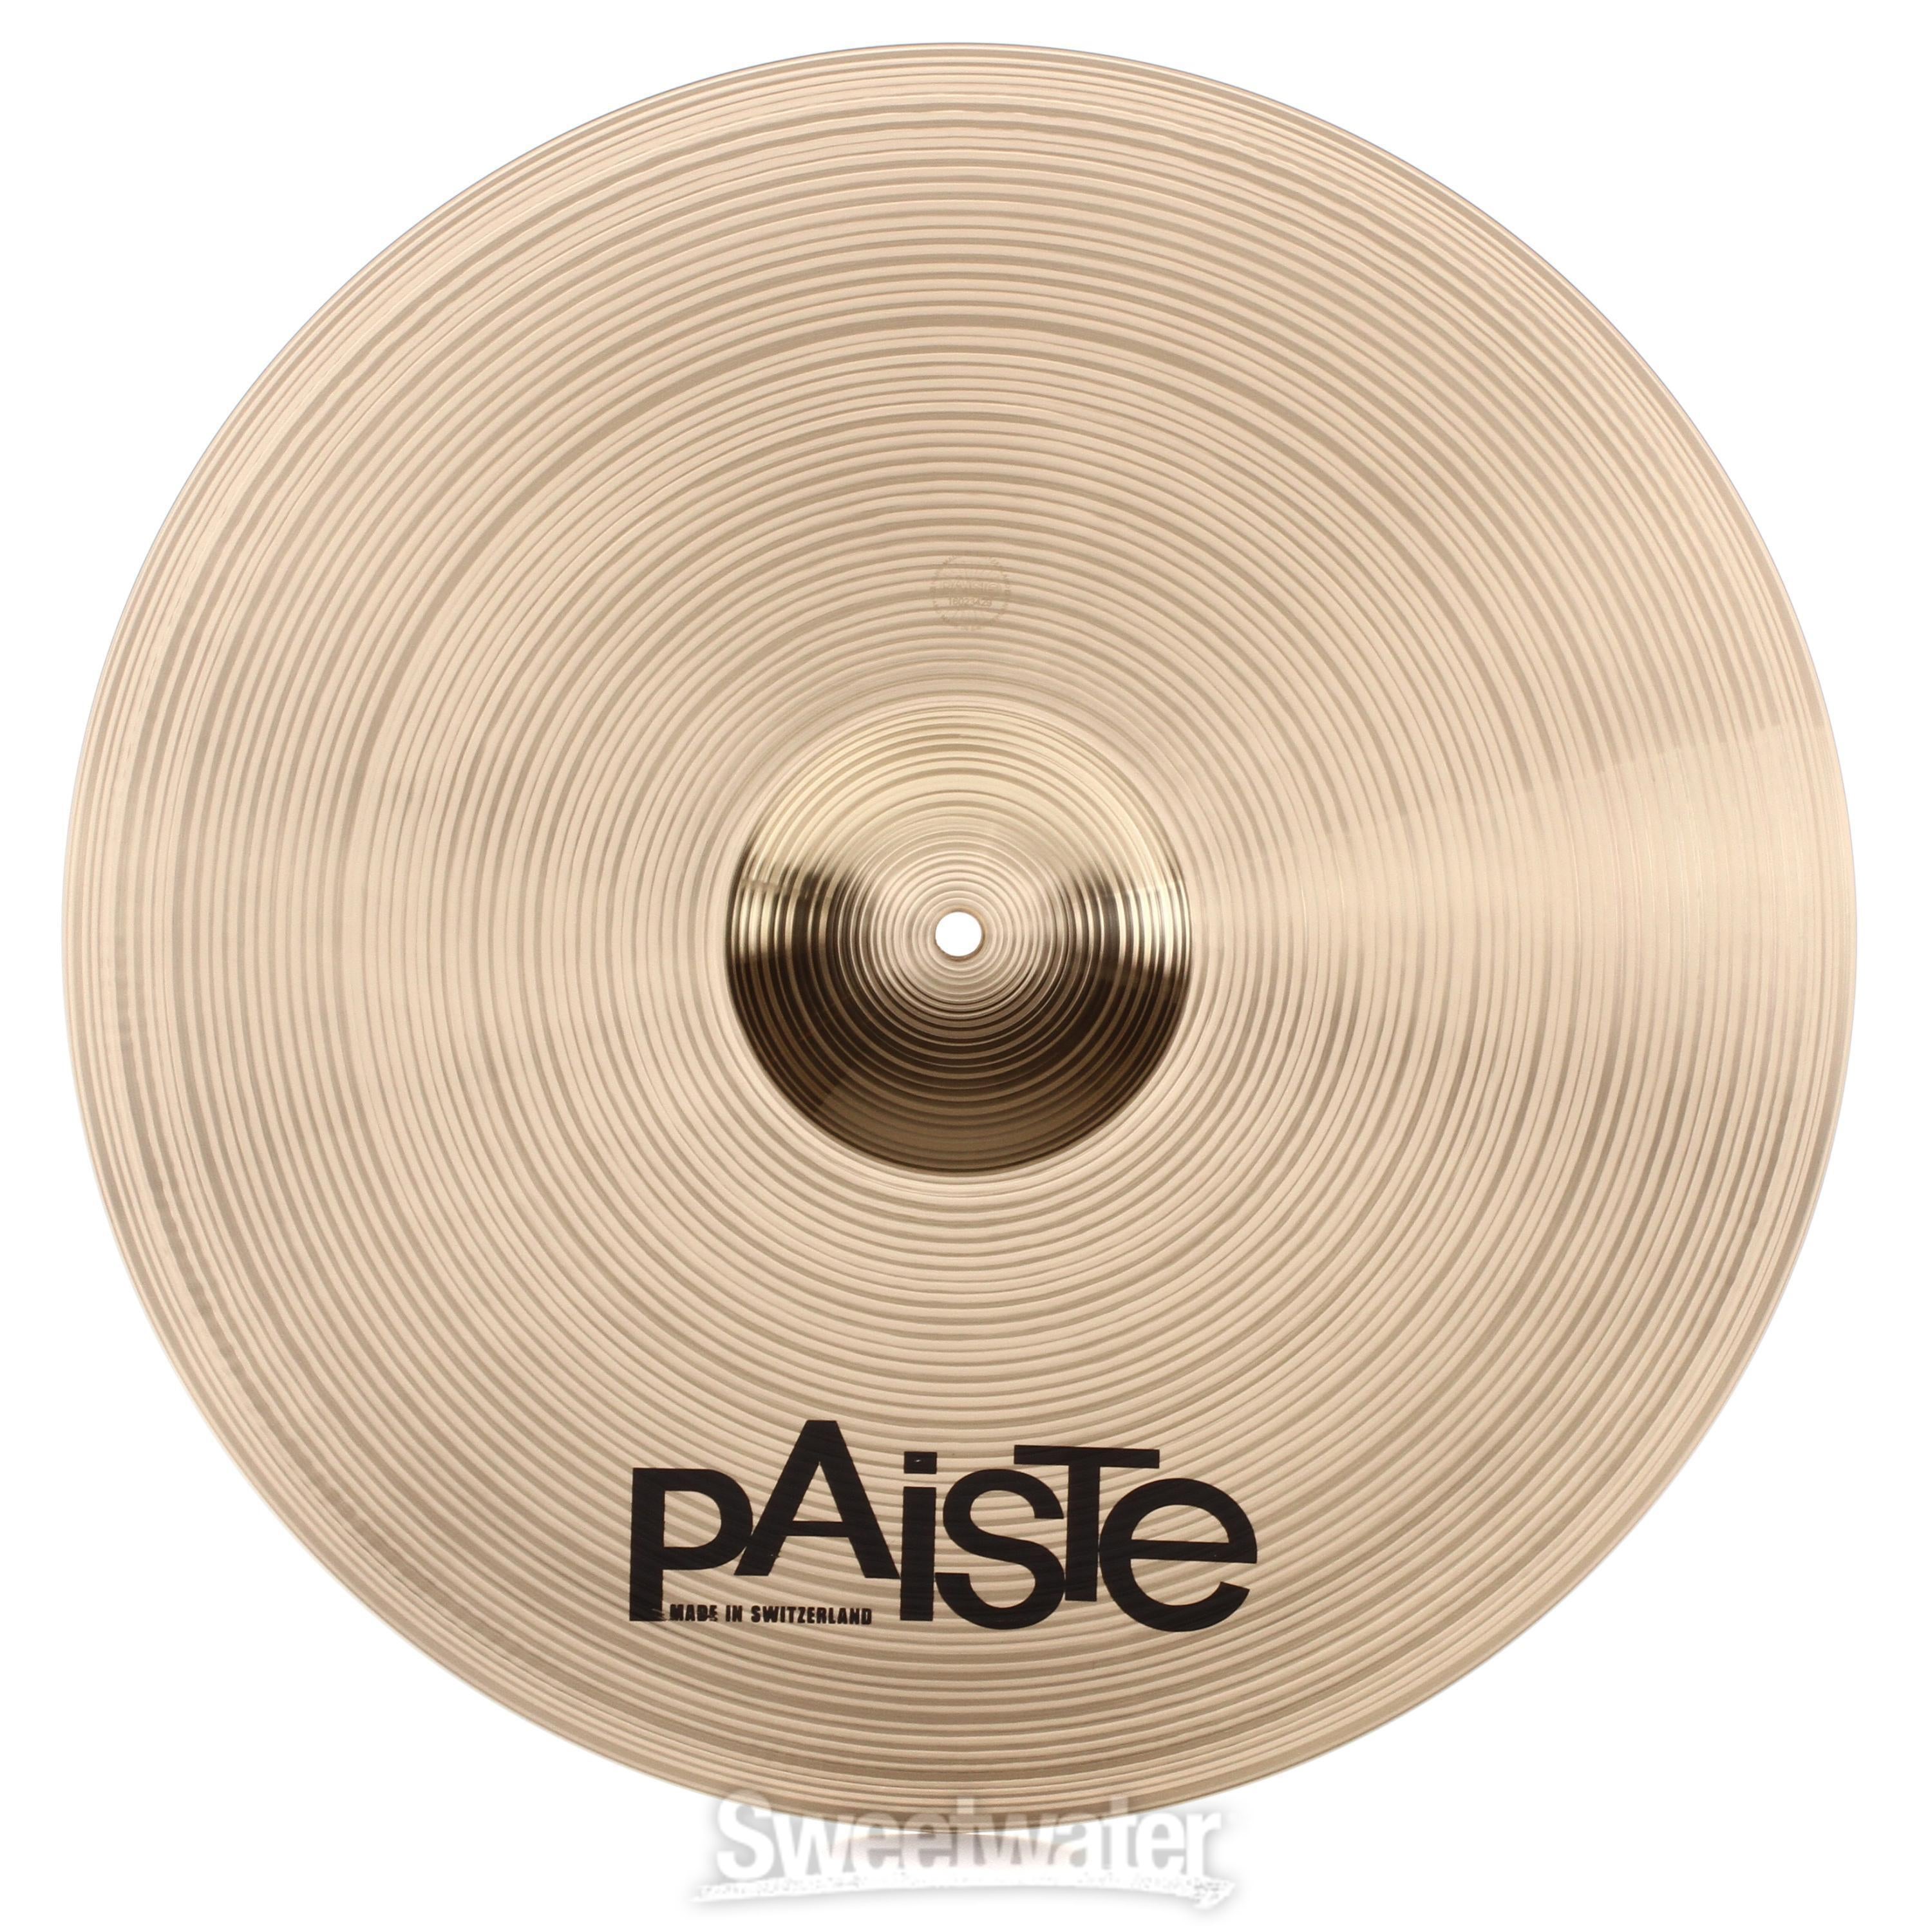 Paiste 20 inch Signature Full Crash Cymbal | Sweetwater